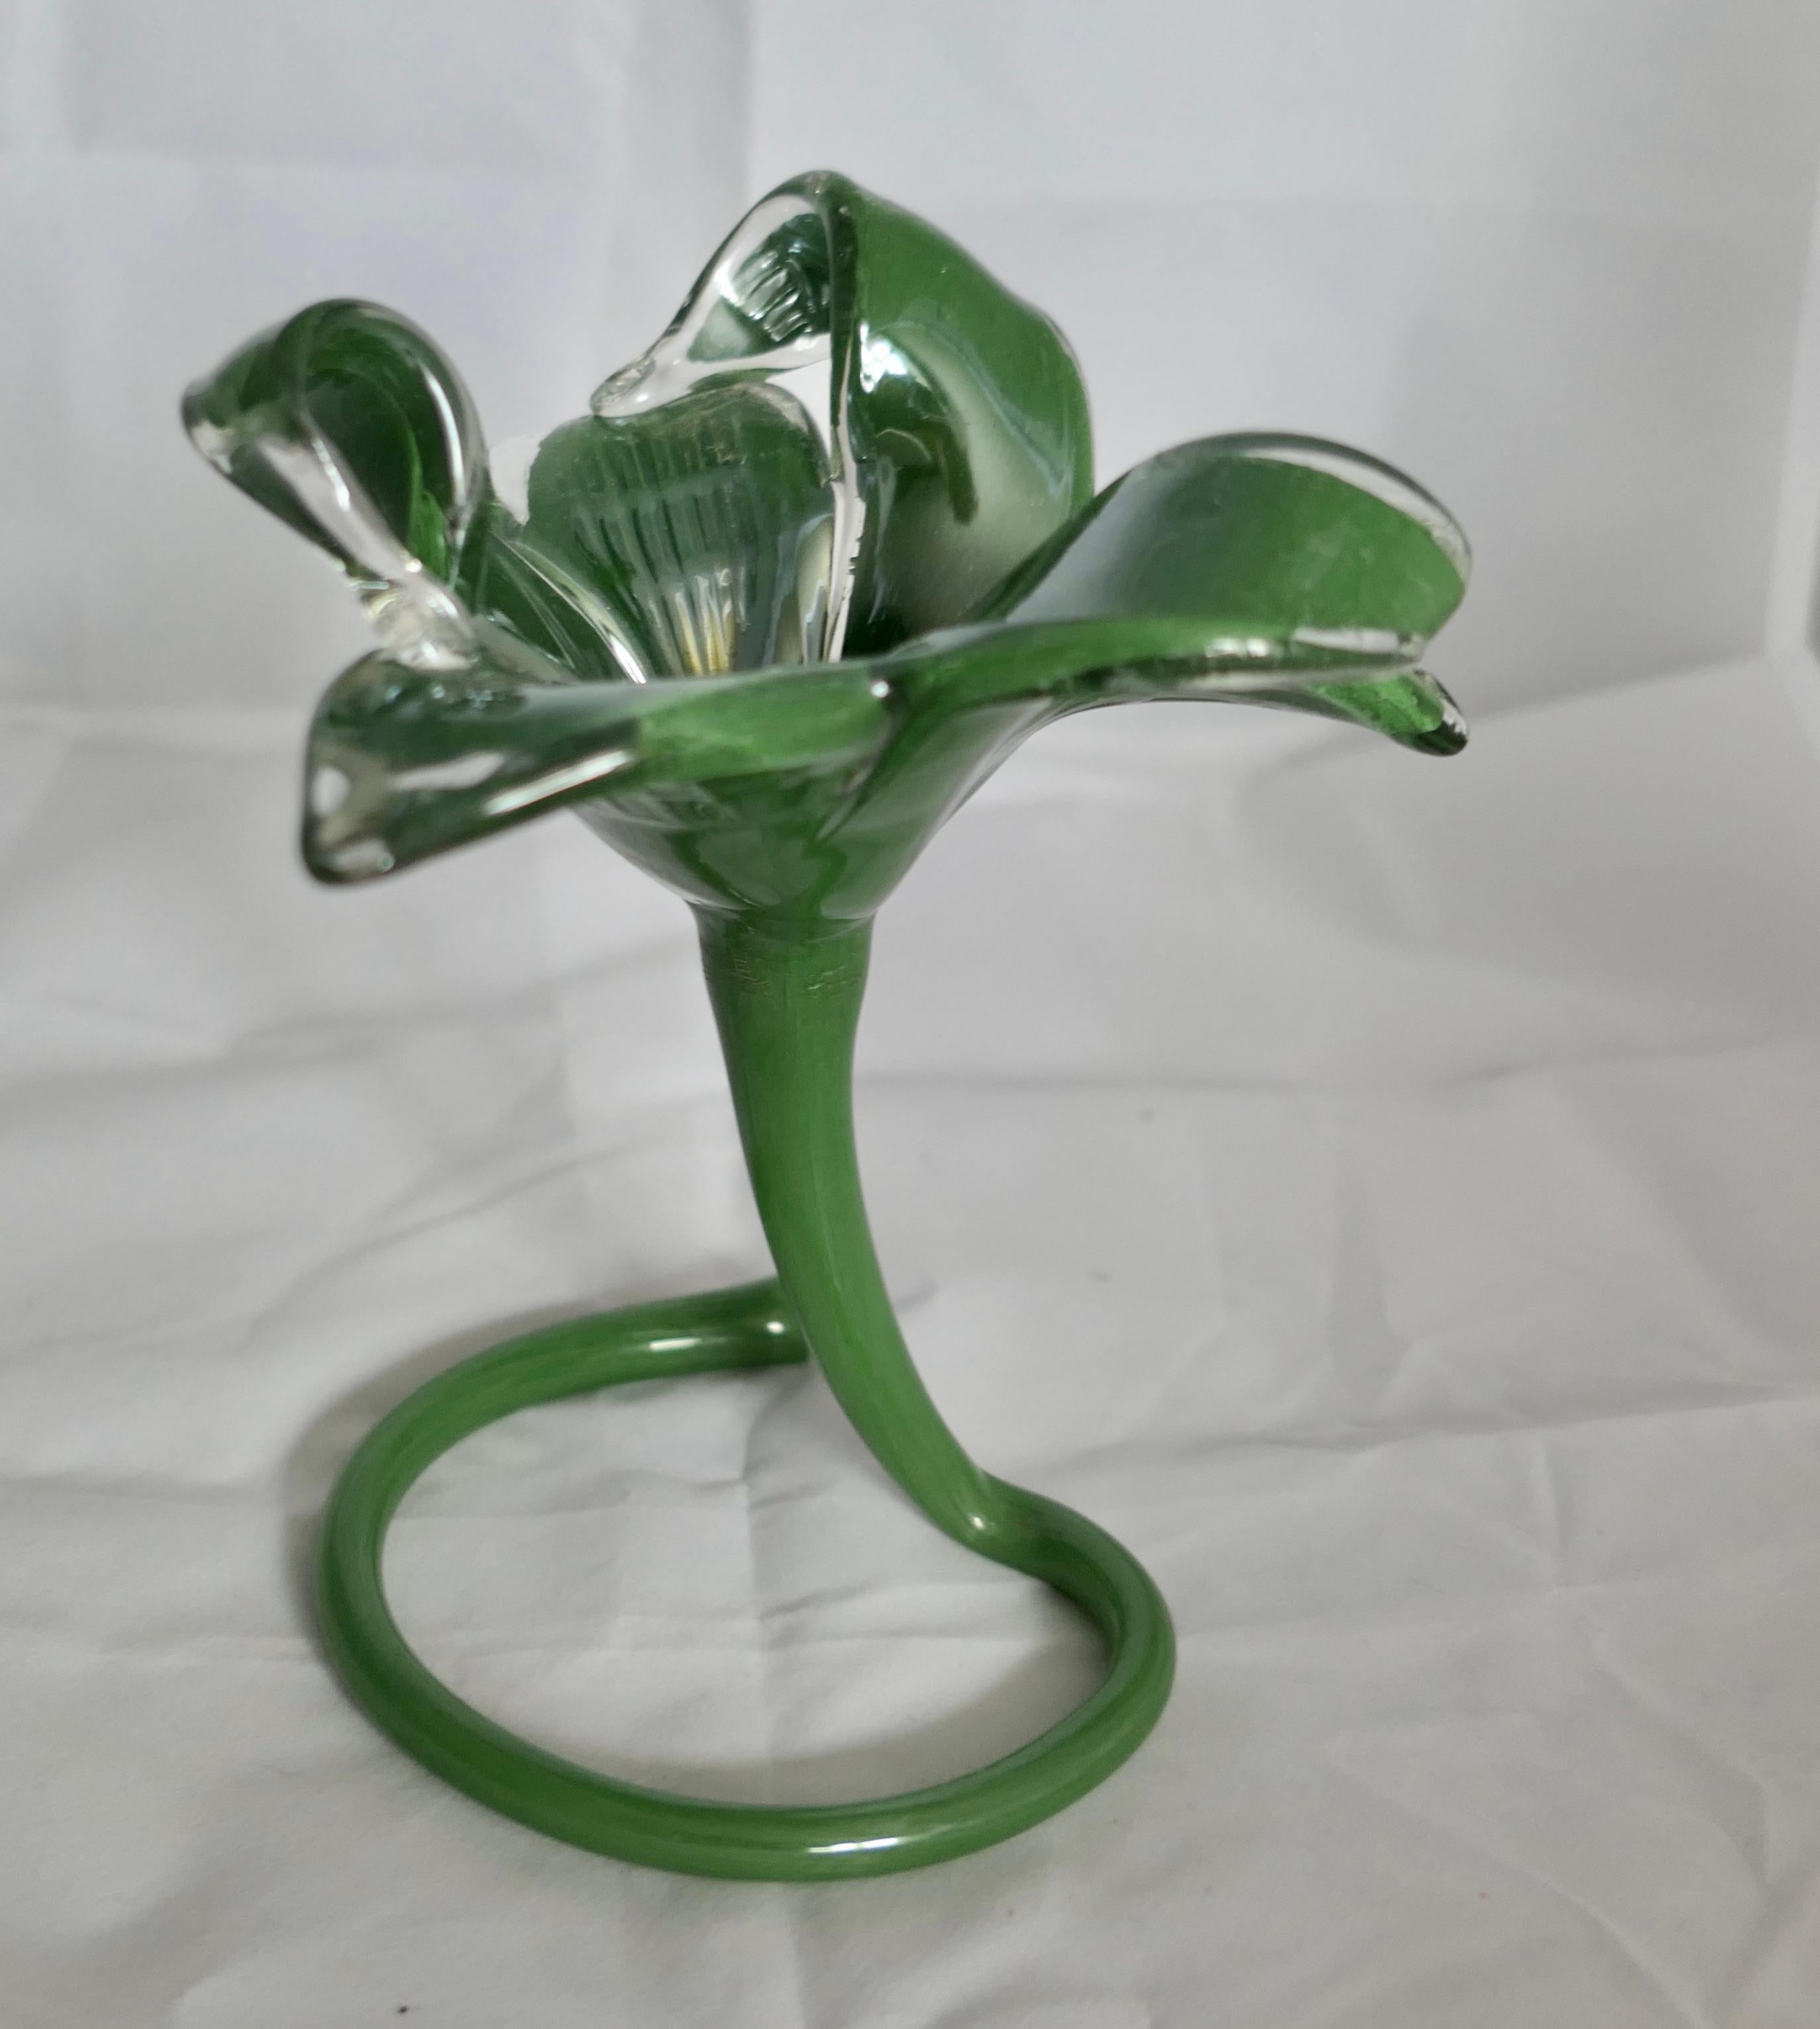 Hand Blown Vintage Murano Green Jack in the Pulpit Vase

A superb example of a Lilly or Jack in the Pulpit Vase, this one has an Amaryllis design with intricately twisted petals and a substantial twirled stem
No Chips or Cracks
The Vase is 7” tall